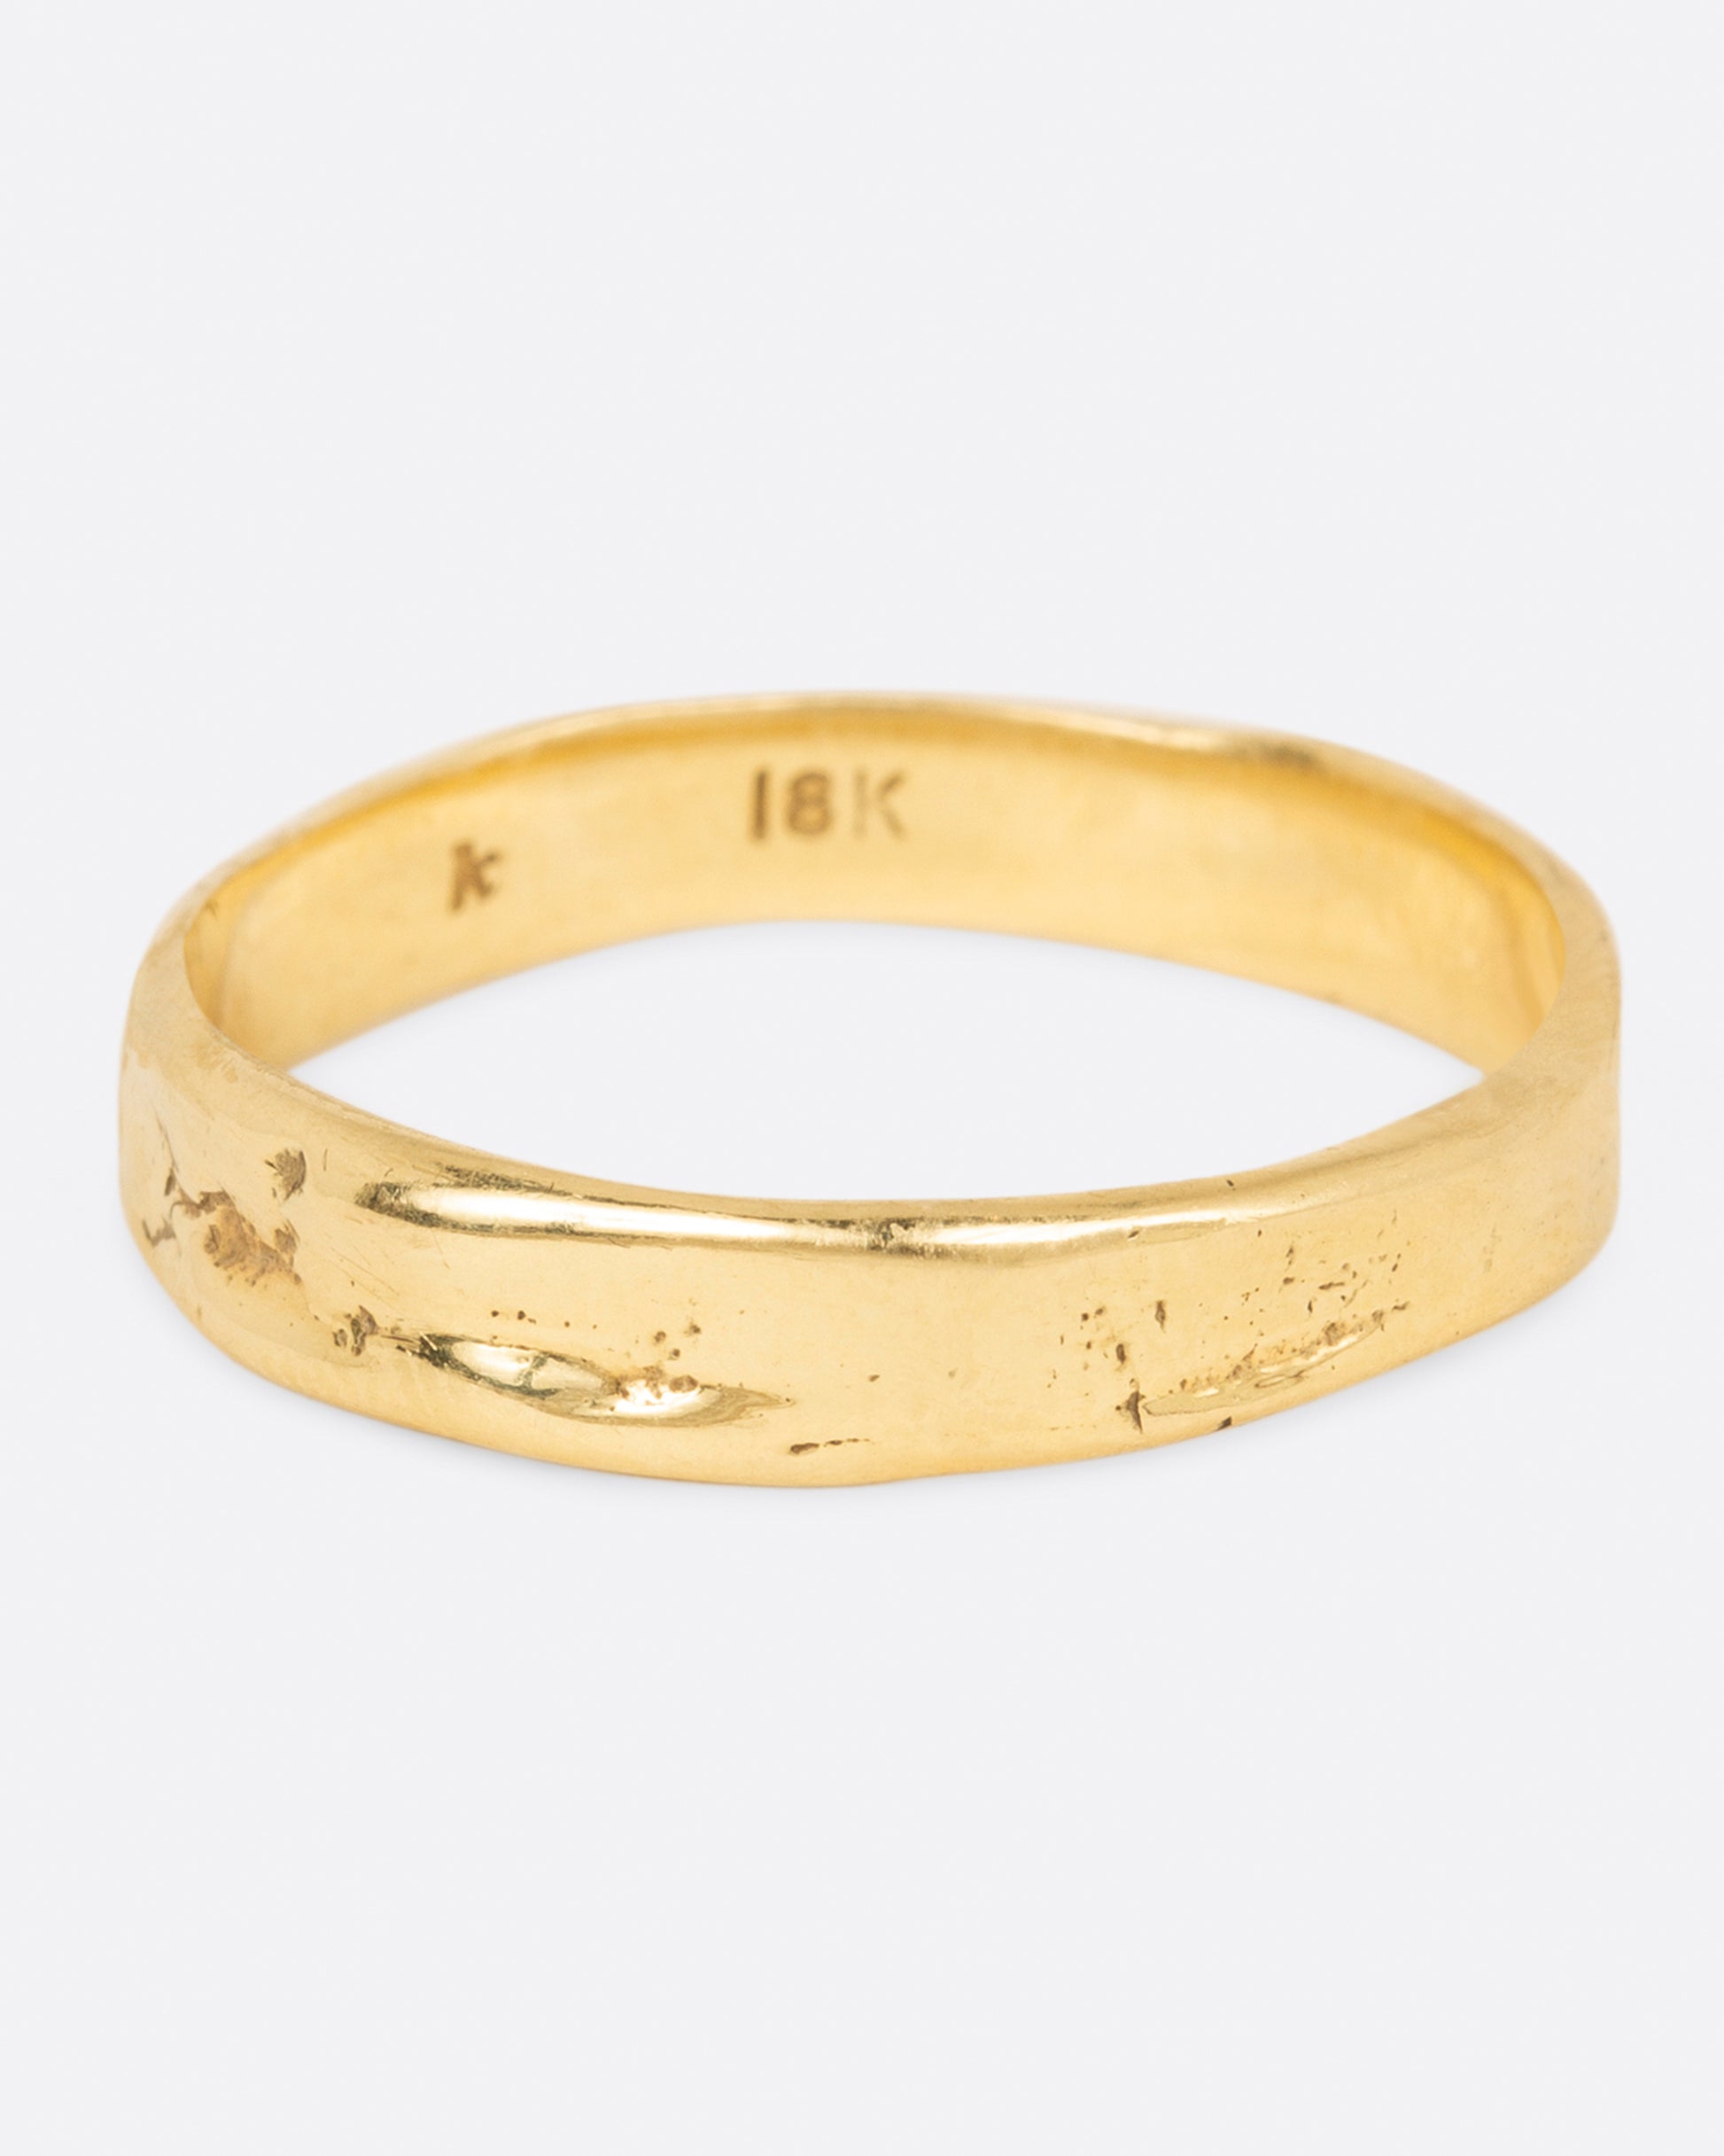 A textured yellow gold band that is meant to look worn in, shown from the front.